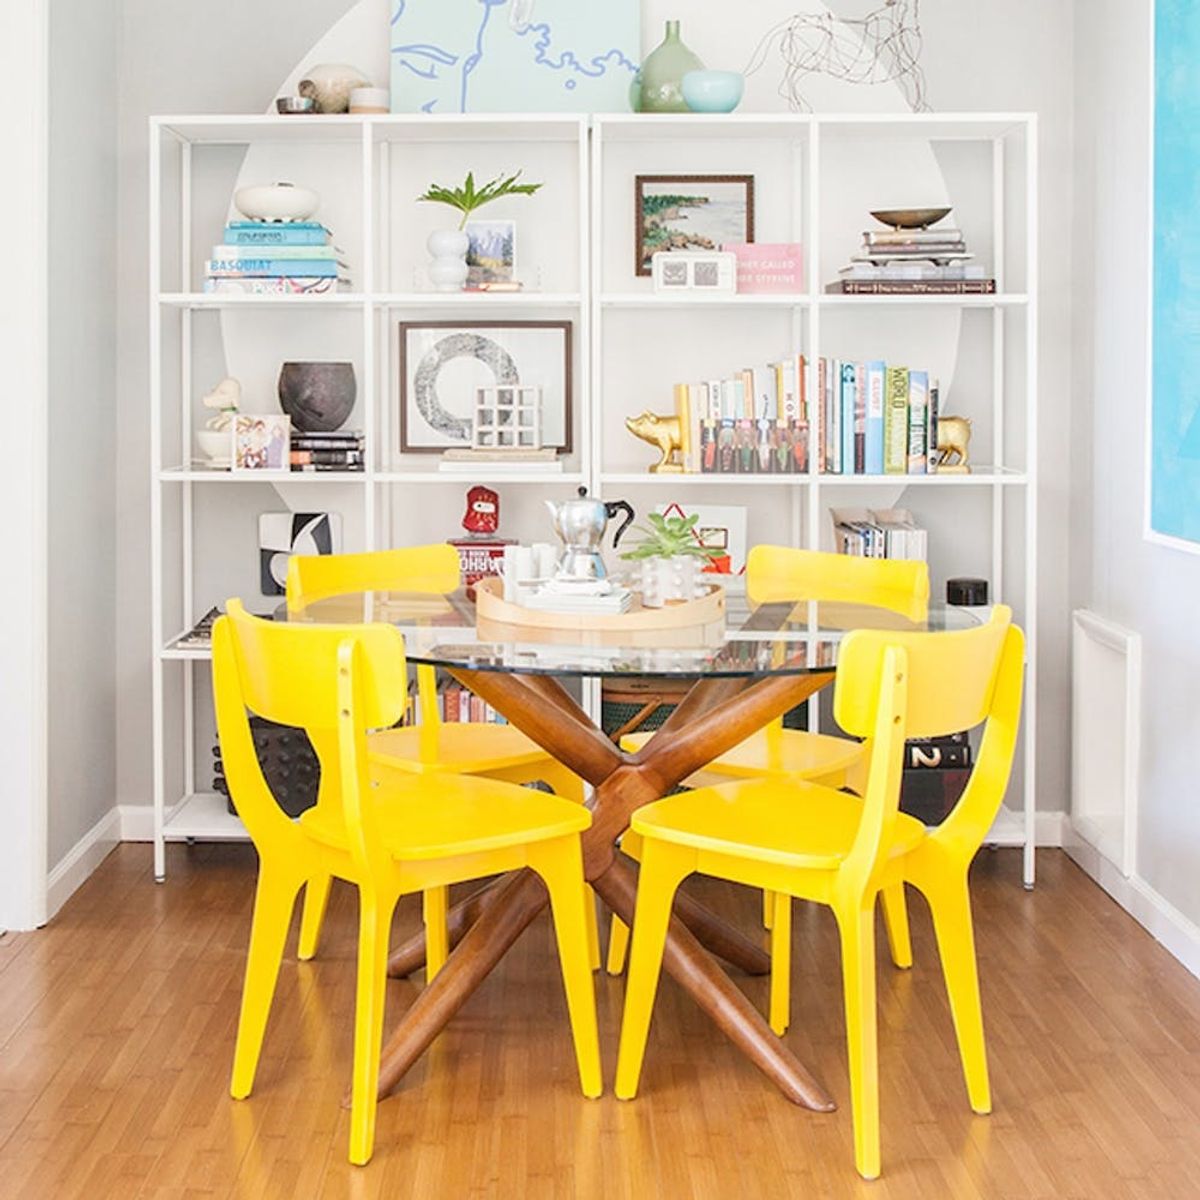 15 Vibrant + Bright Dining Rooms for Serious Color Inspo